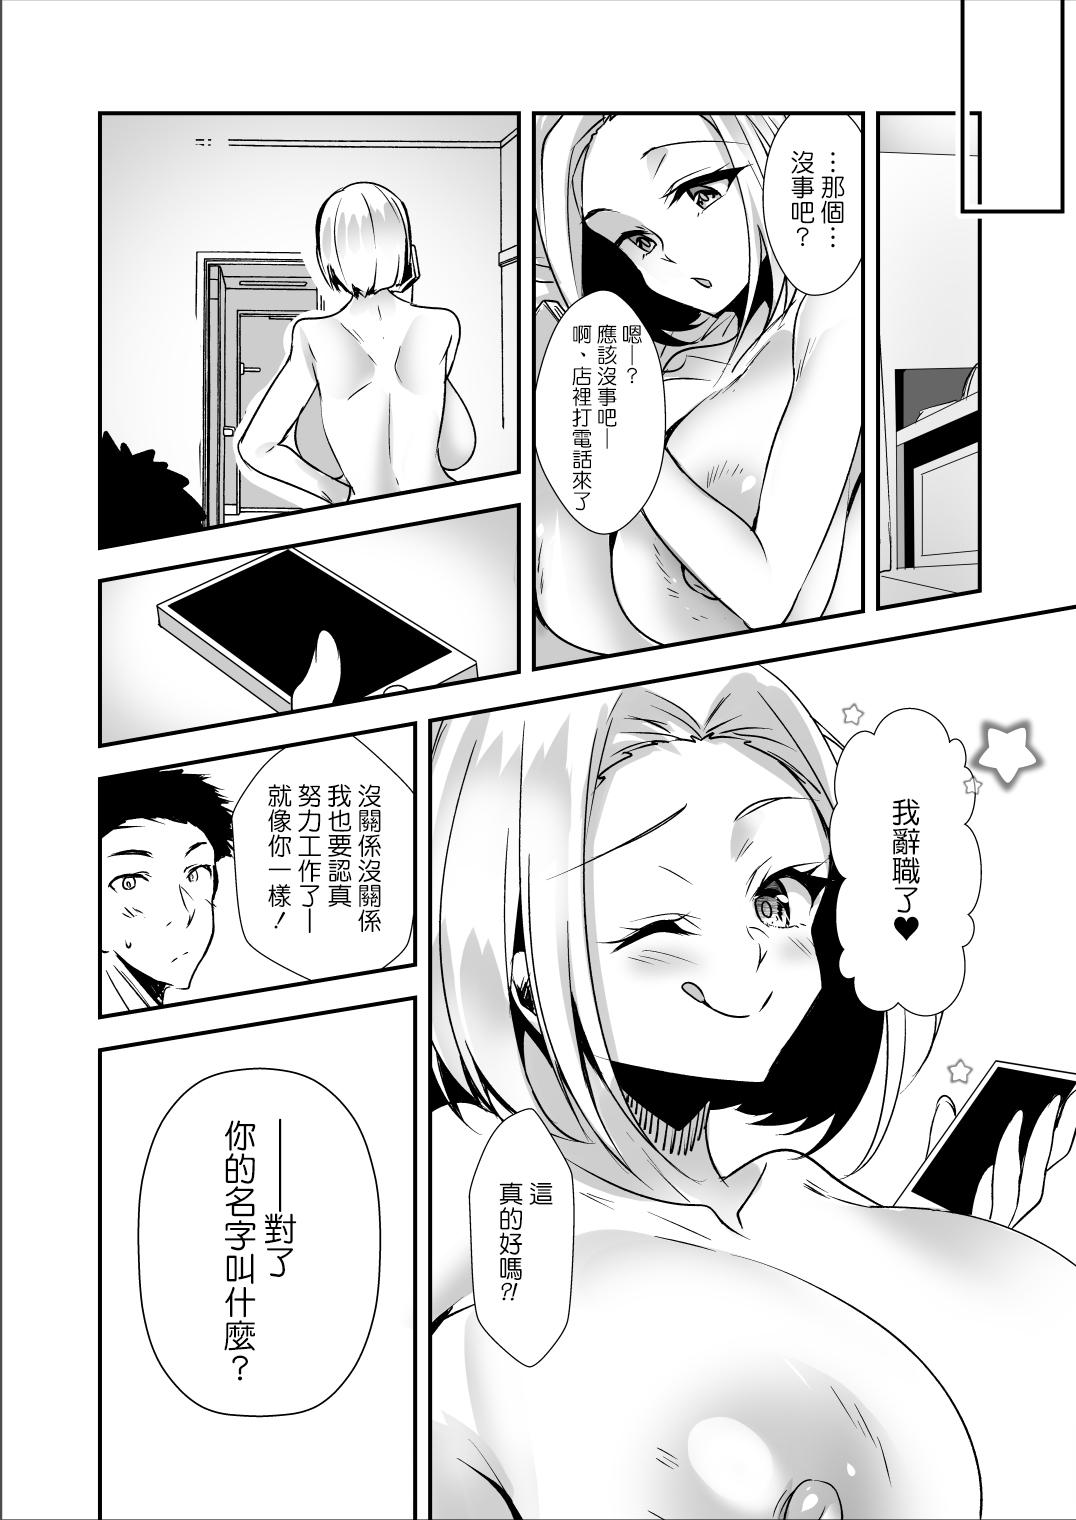 Boy Fuck Girl Oppai Delivery - Original Sub - Page 21